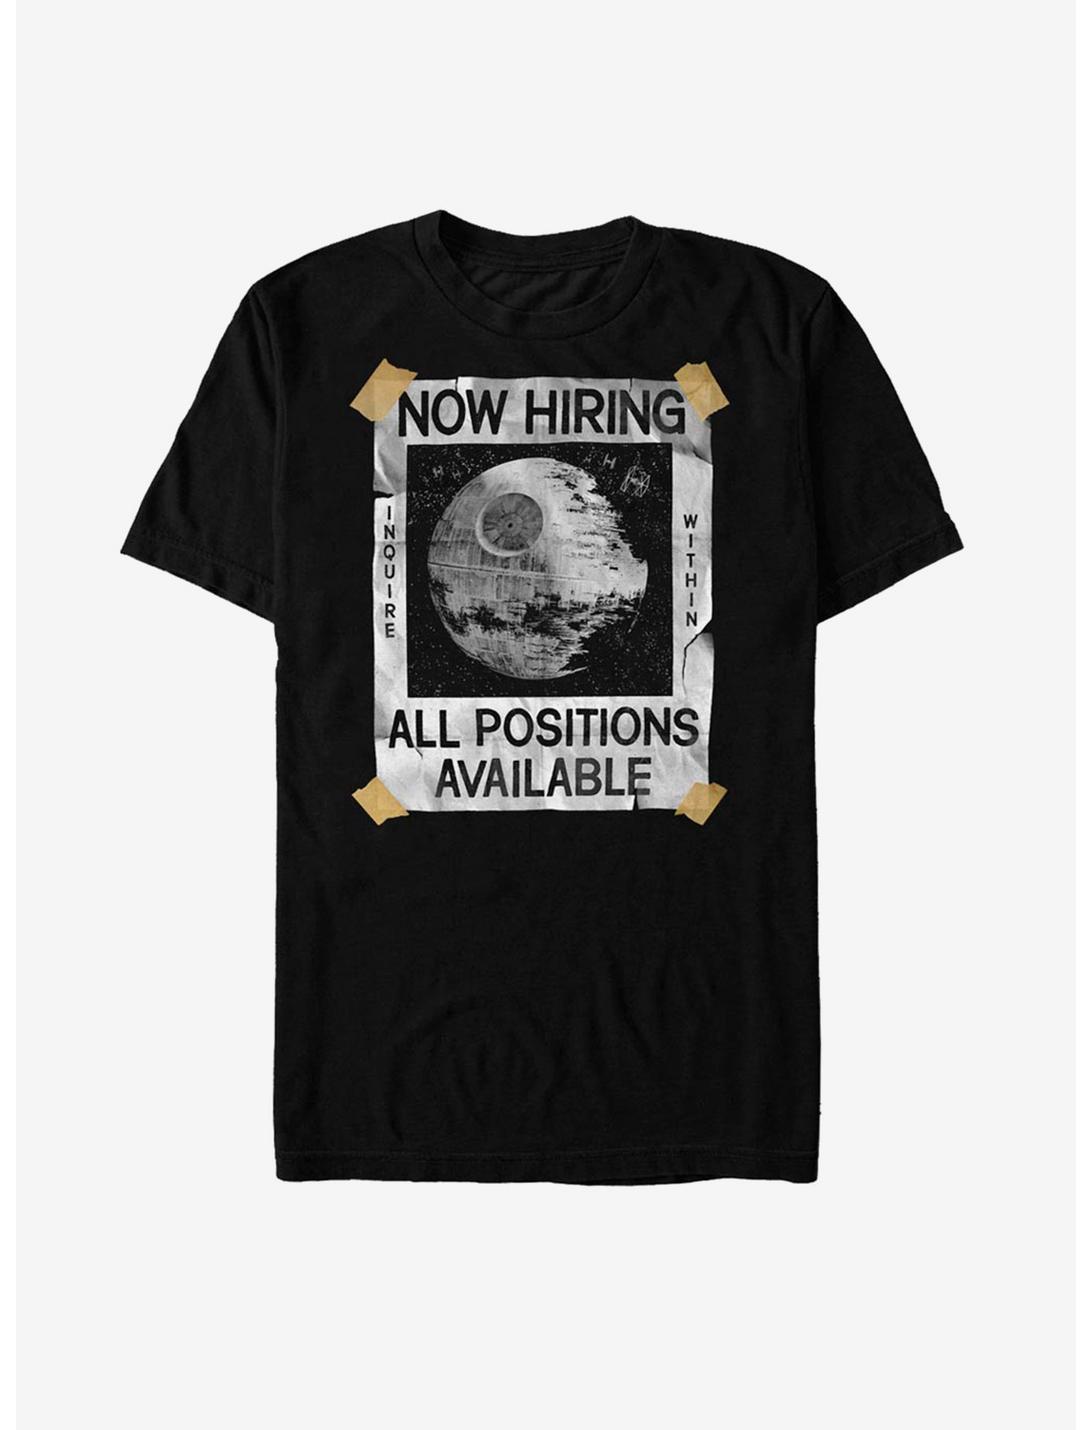 Star Wars All Positions Available T-Shirt, BLACK, hi-res